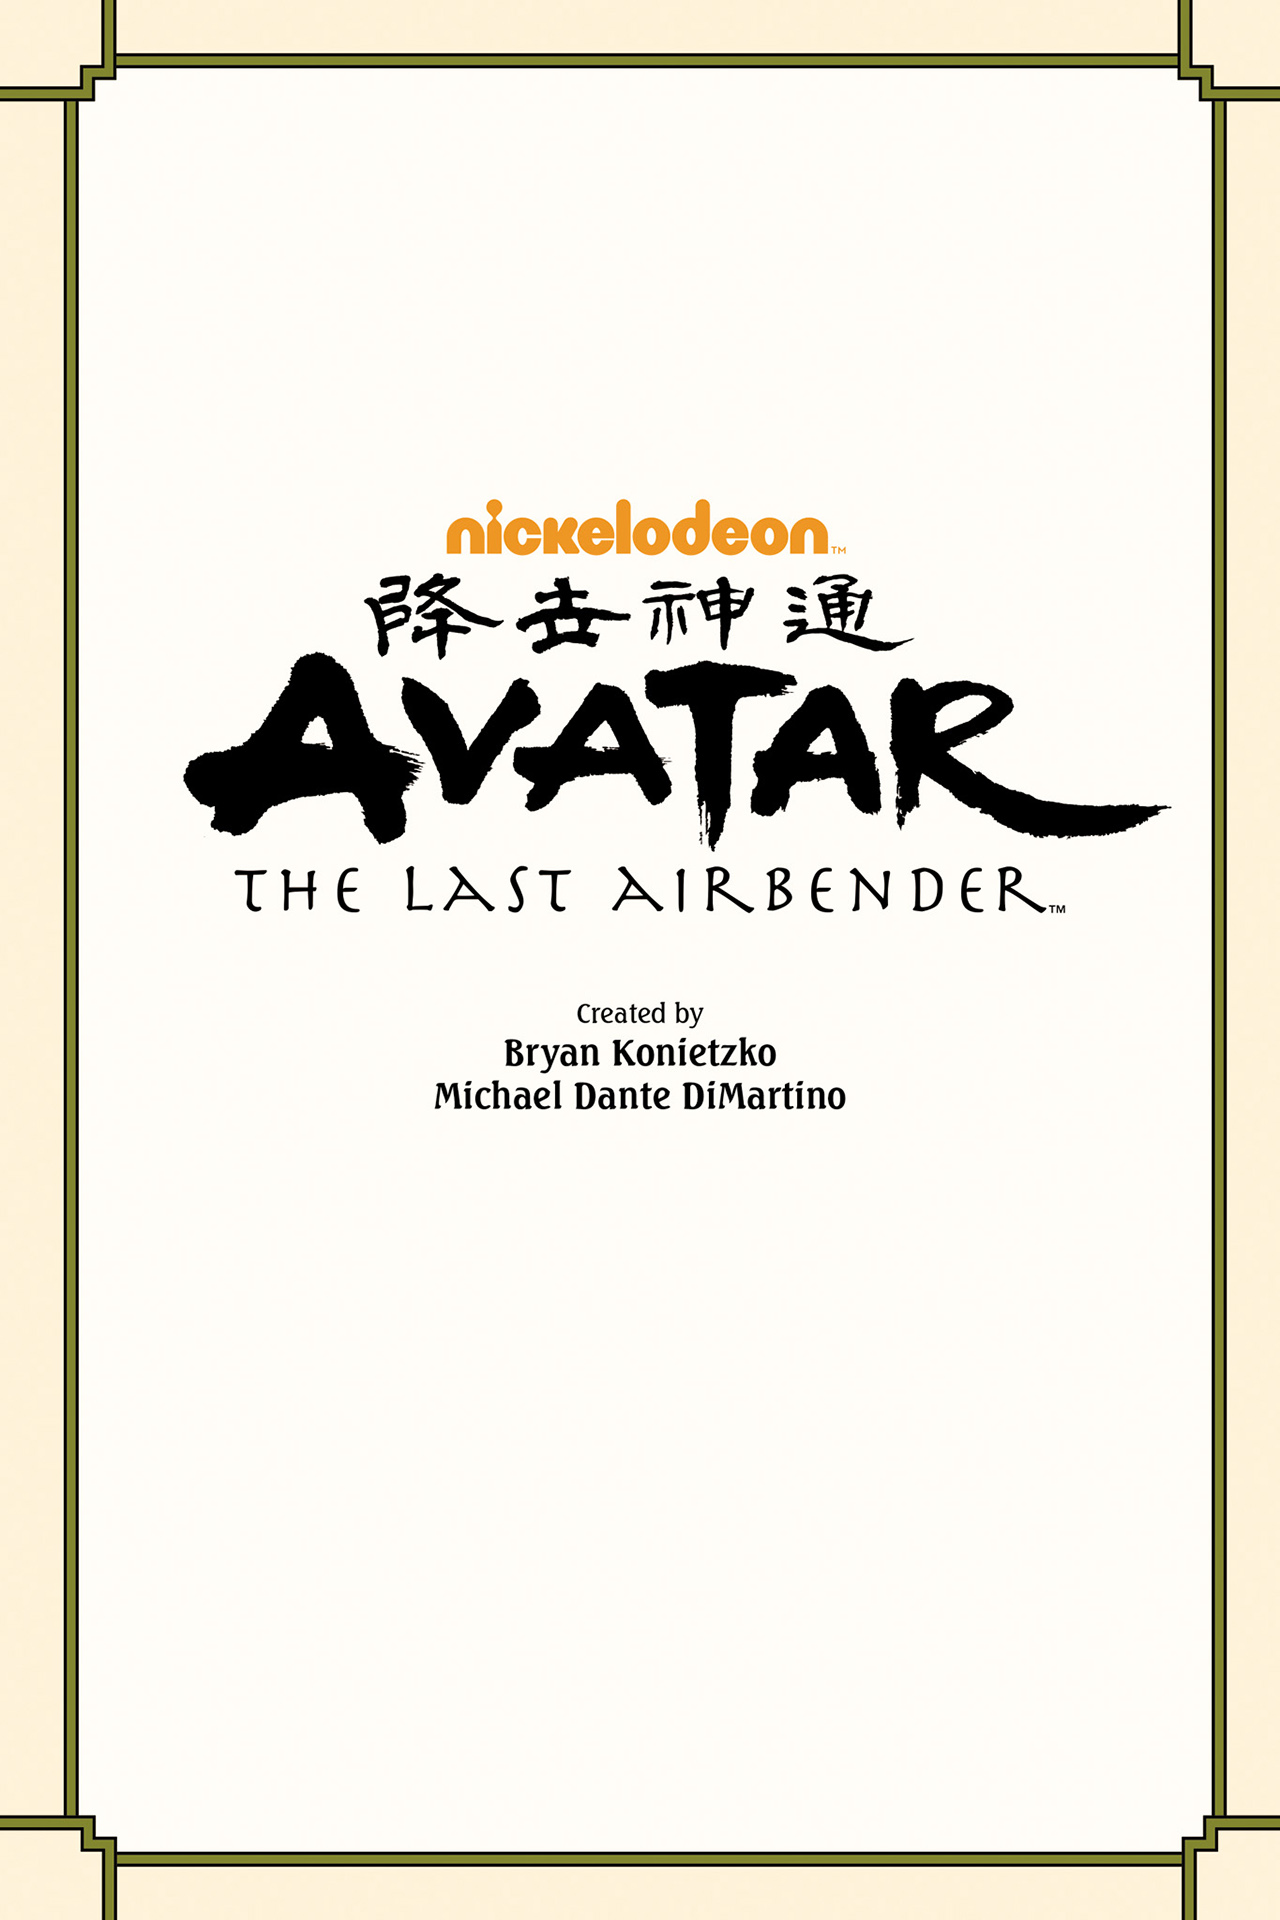 Read online Nickelodeon Avatar: The Last Airbender - The Rift comic -  Issue # Part 3 - 2